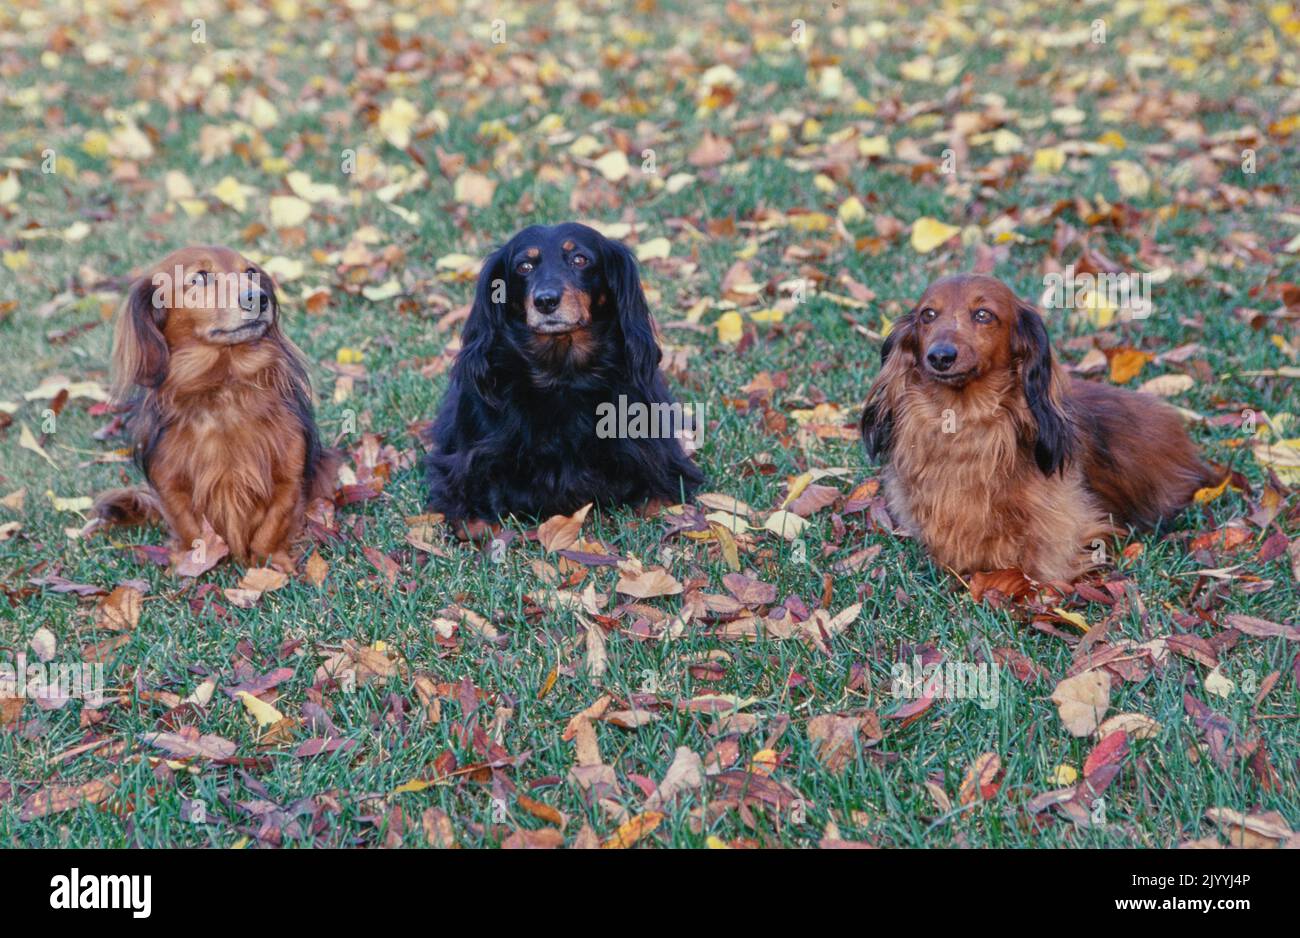 Dachshunds in grass and leaves Stock Photo